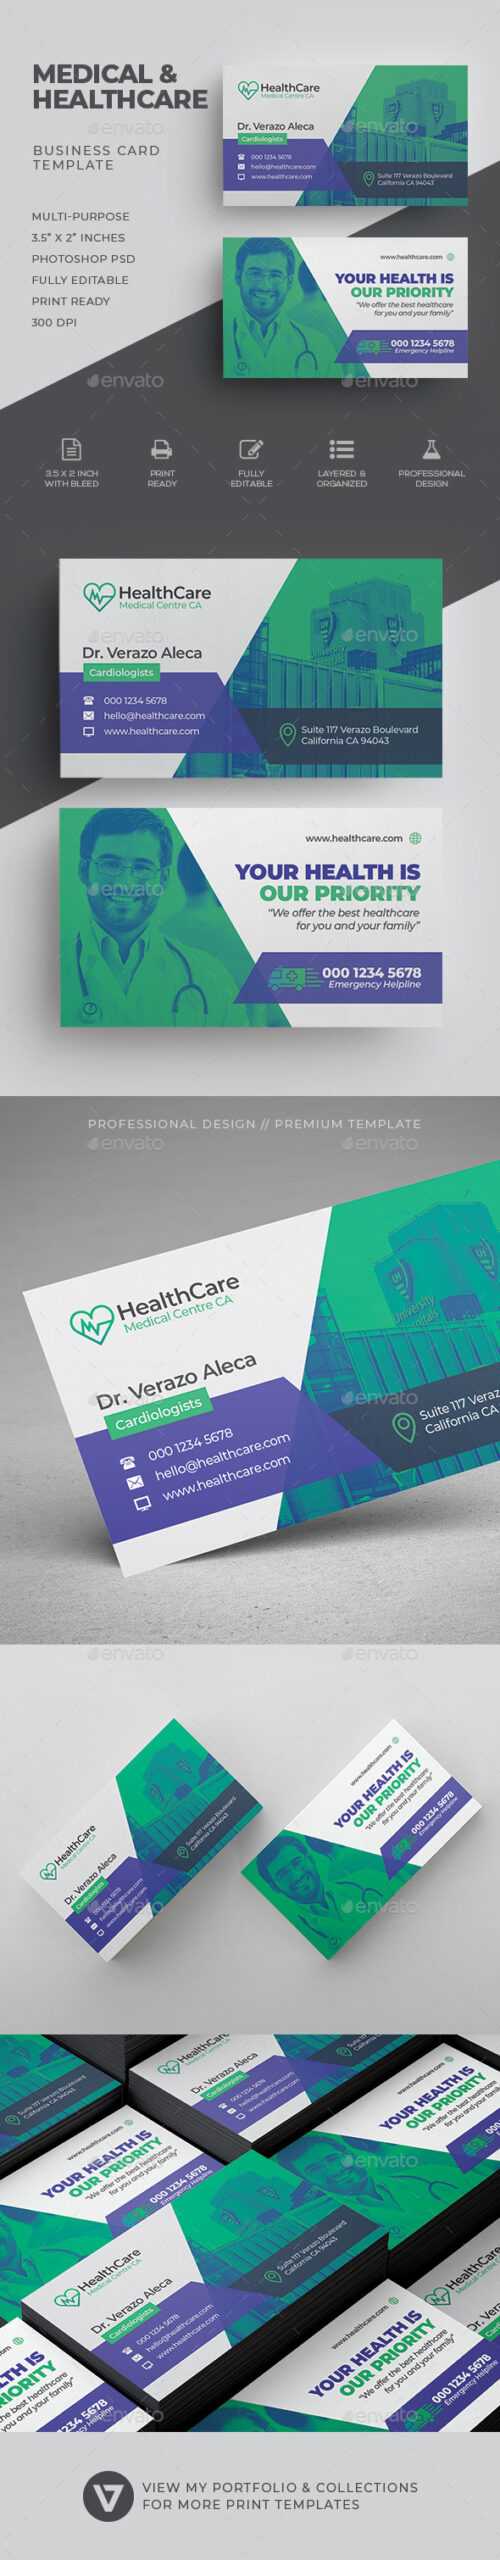 Business Card Templates & Designs From Graphicriver With Medical Business Cards Templates Free